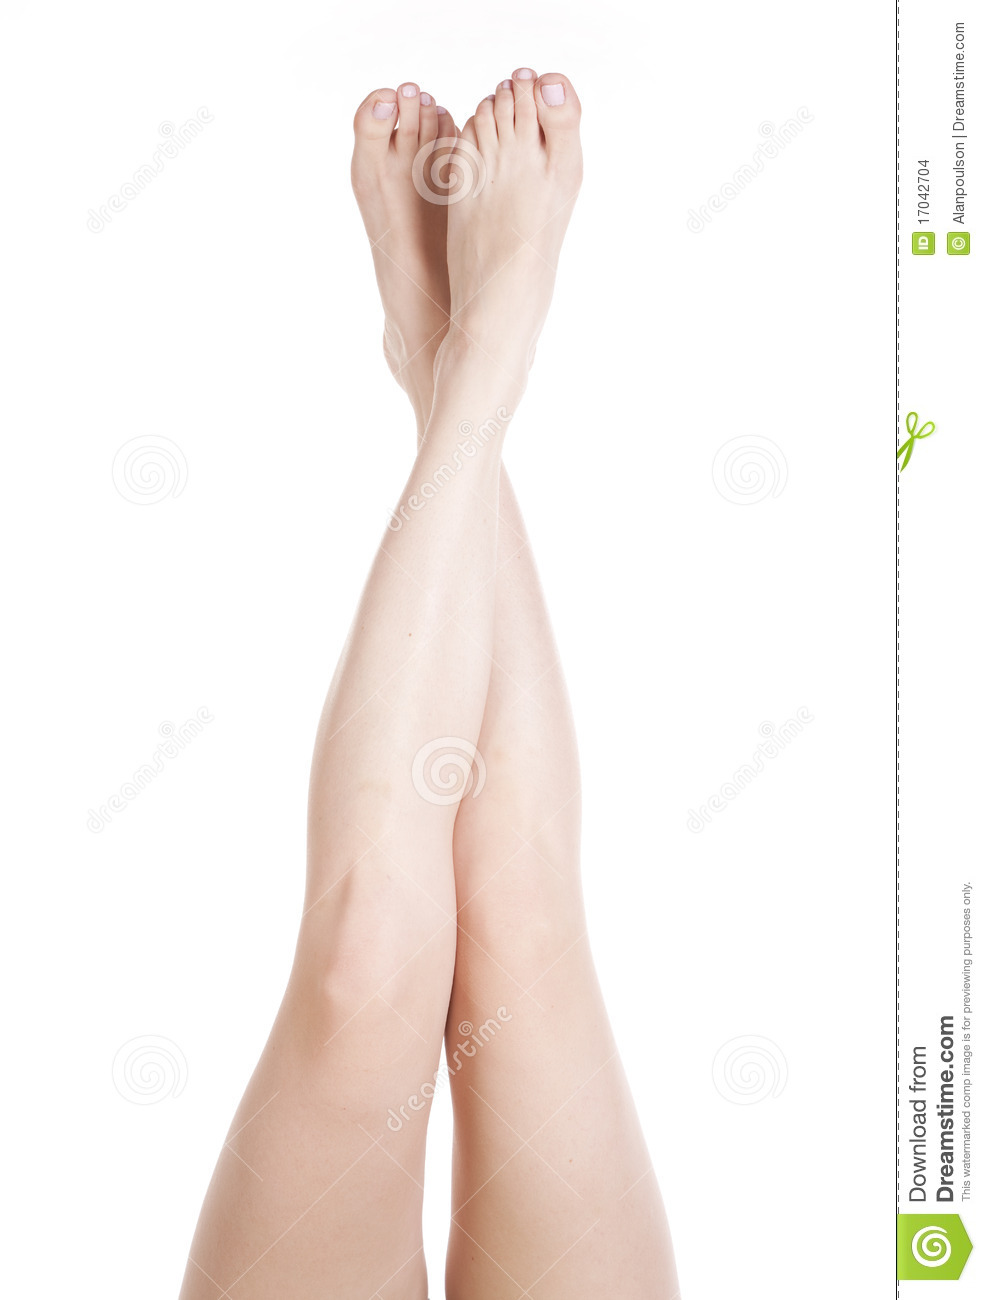 More Similar Stock Images Of   Womans Feet Up Crossed